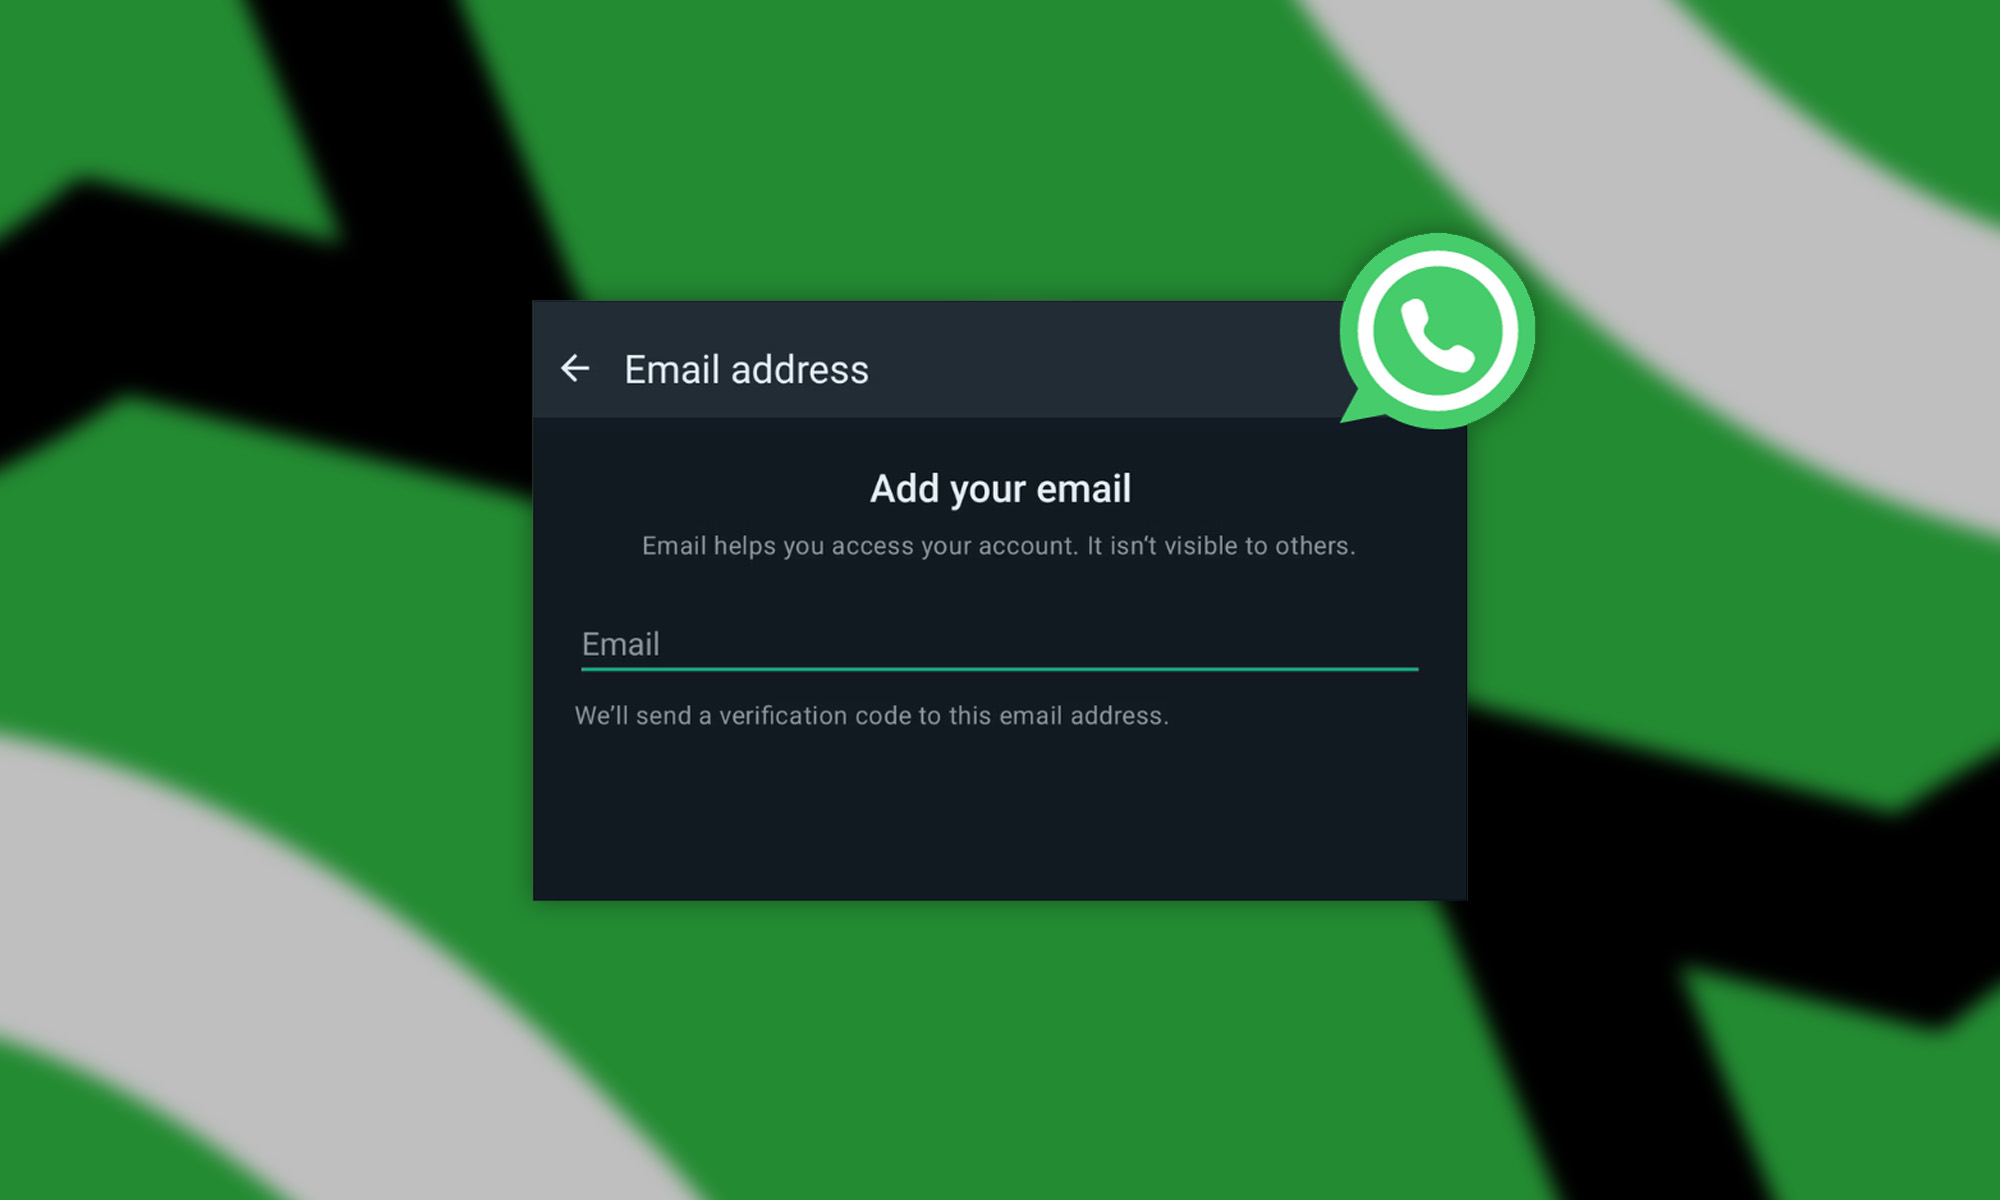 whatsapp now allows account authentication via email